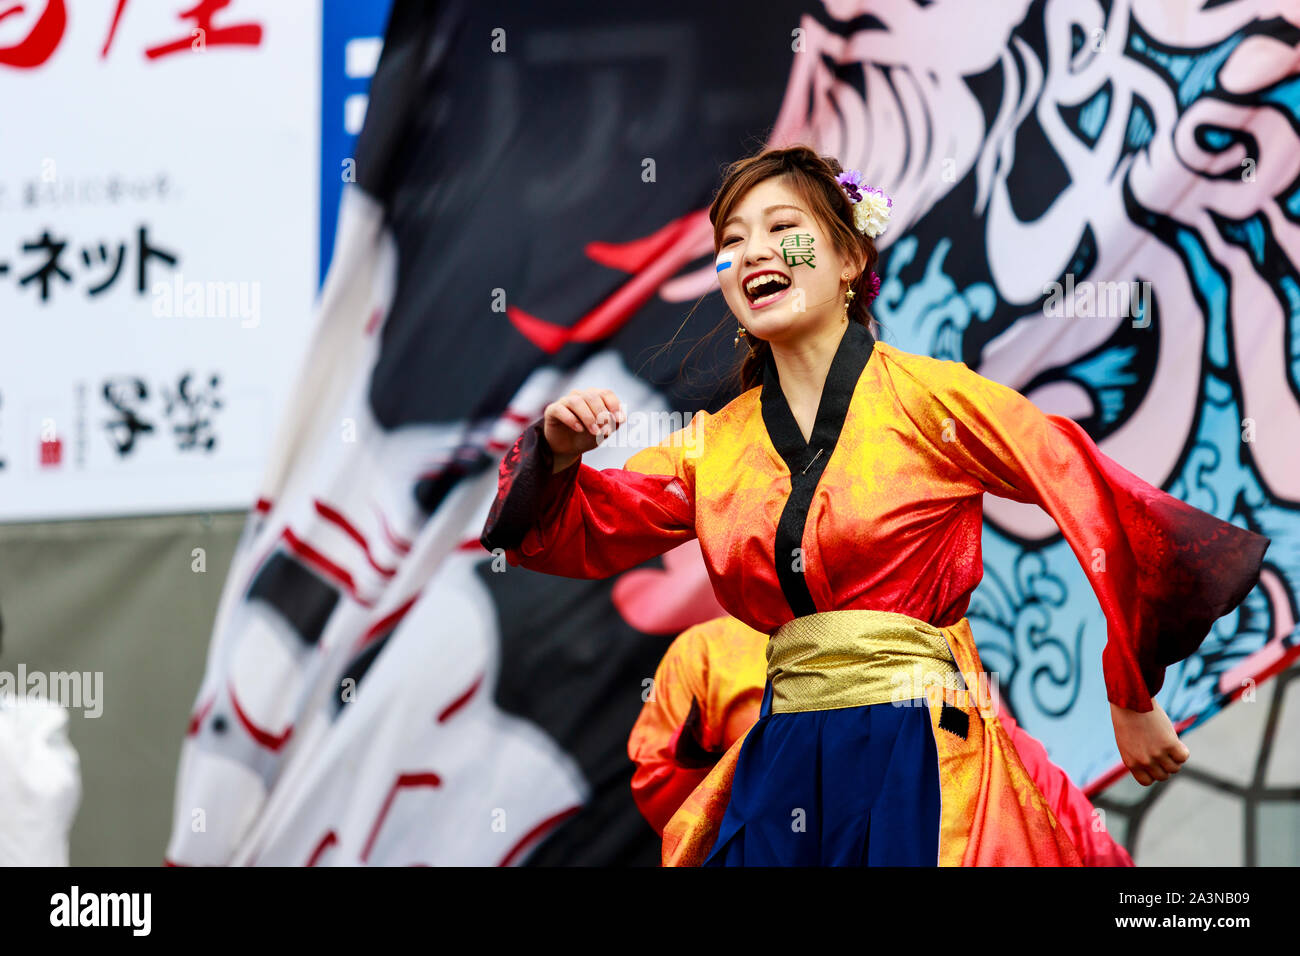 Kyusyu Gassai festival in Kumamoto, Japan. Close up of Yosakoi dancer dancing, with mouth wide open and happy expression. Wears red and yellow jacket. Stock Photo